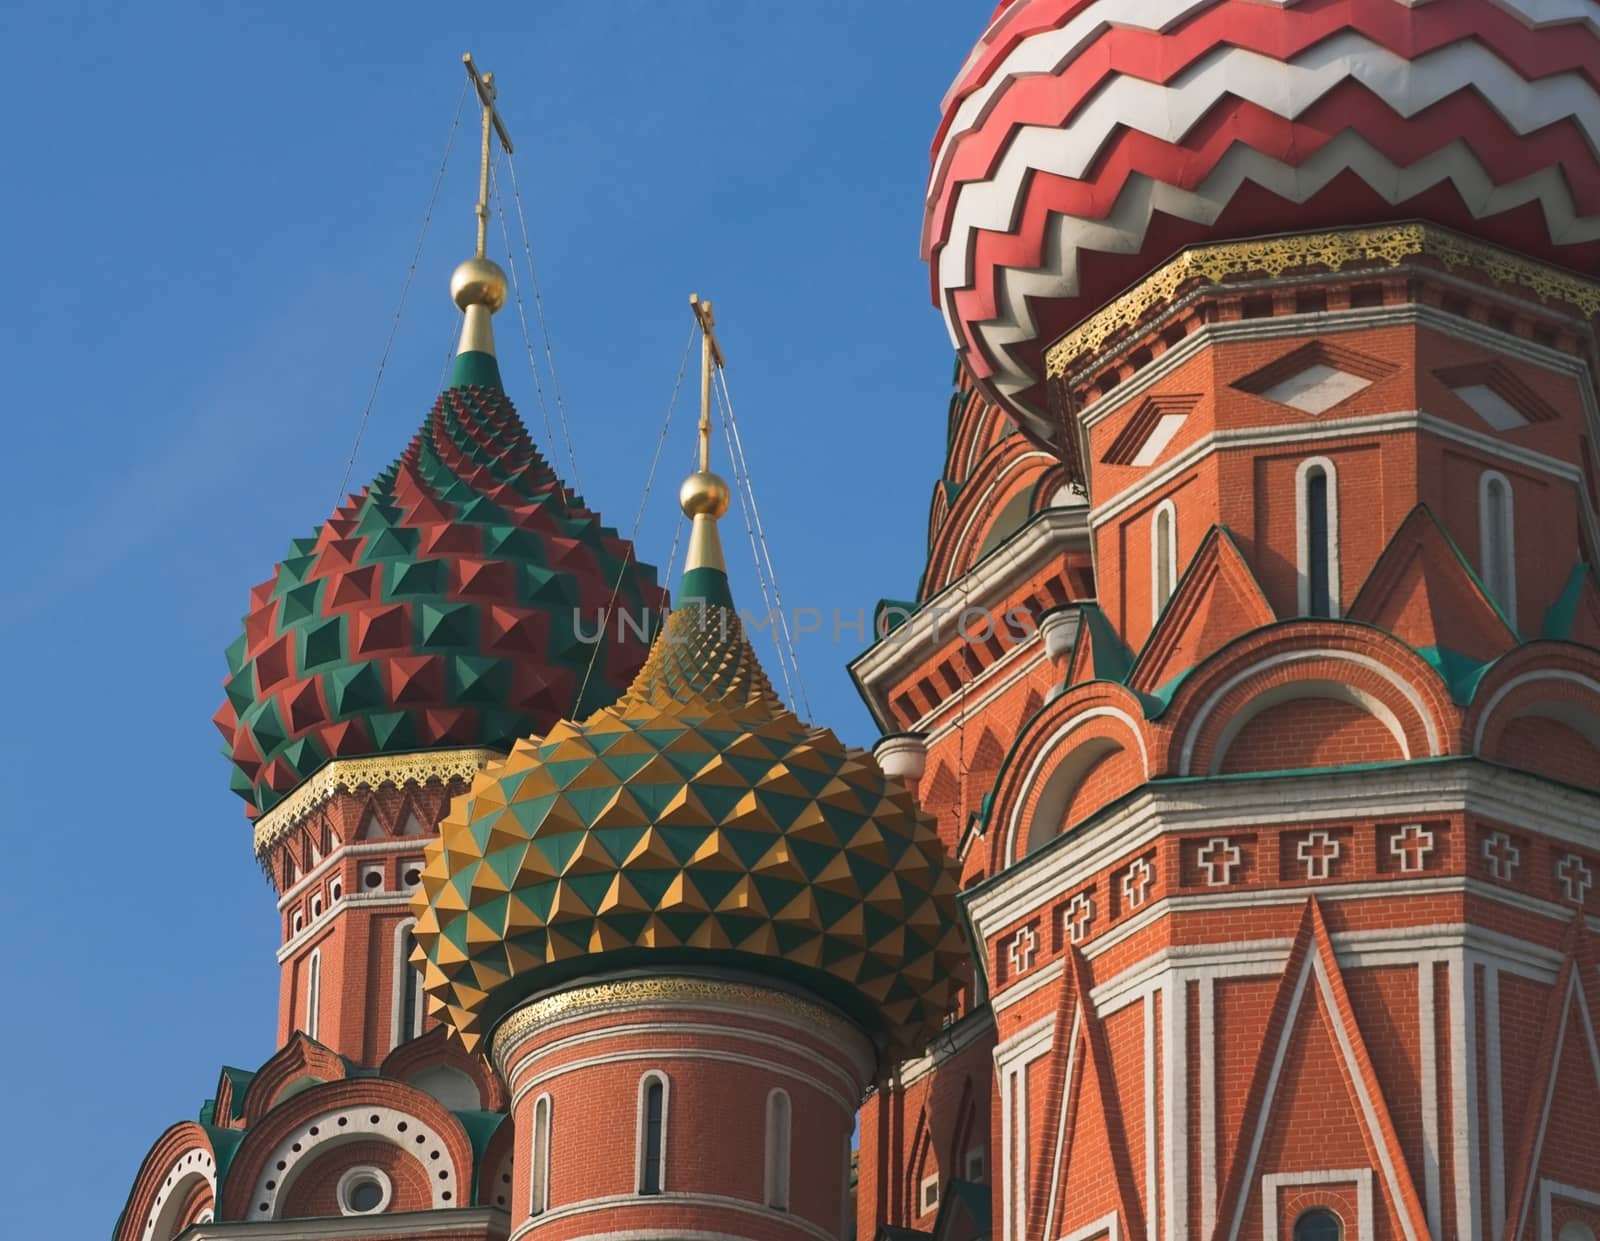 Domes of St. Basil's Cathedral on Red Square in Moscow